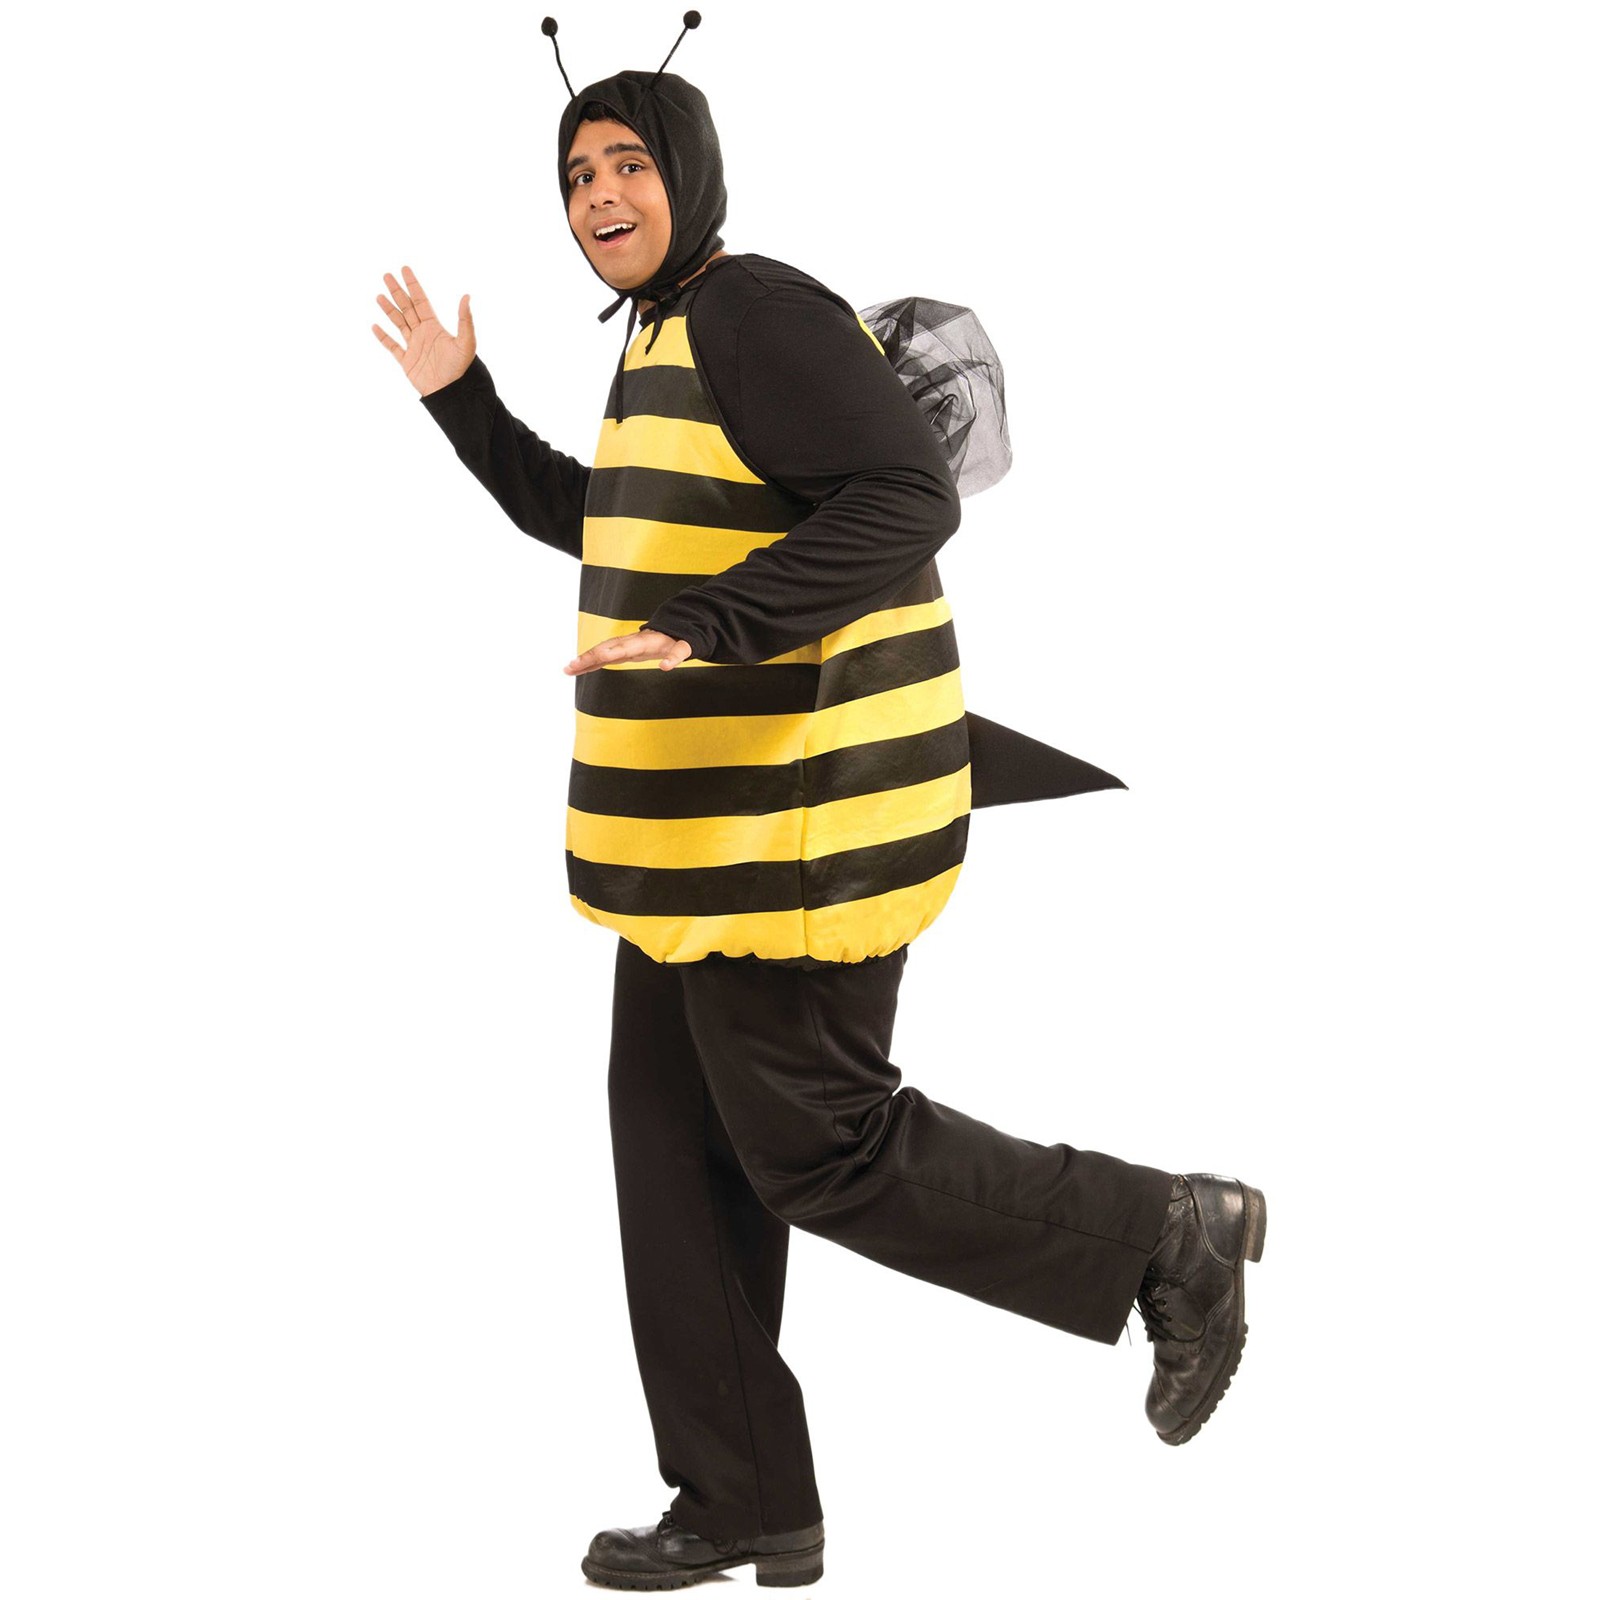 Bumble Bee Adult Costume Plus - image 1 of 2